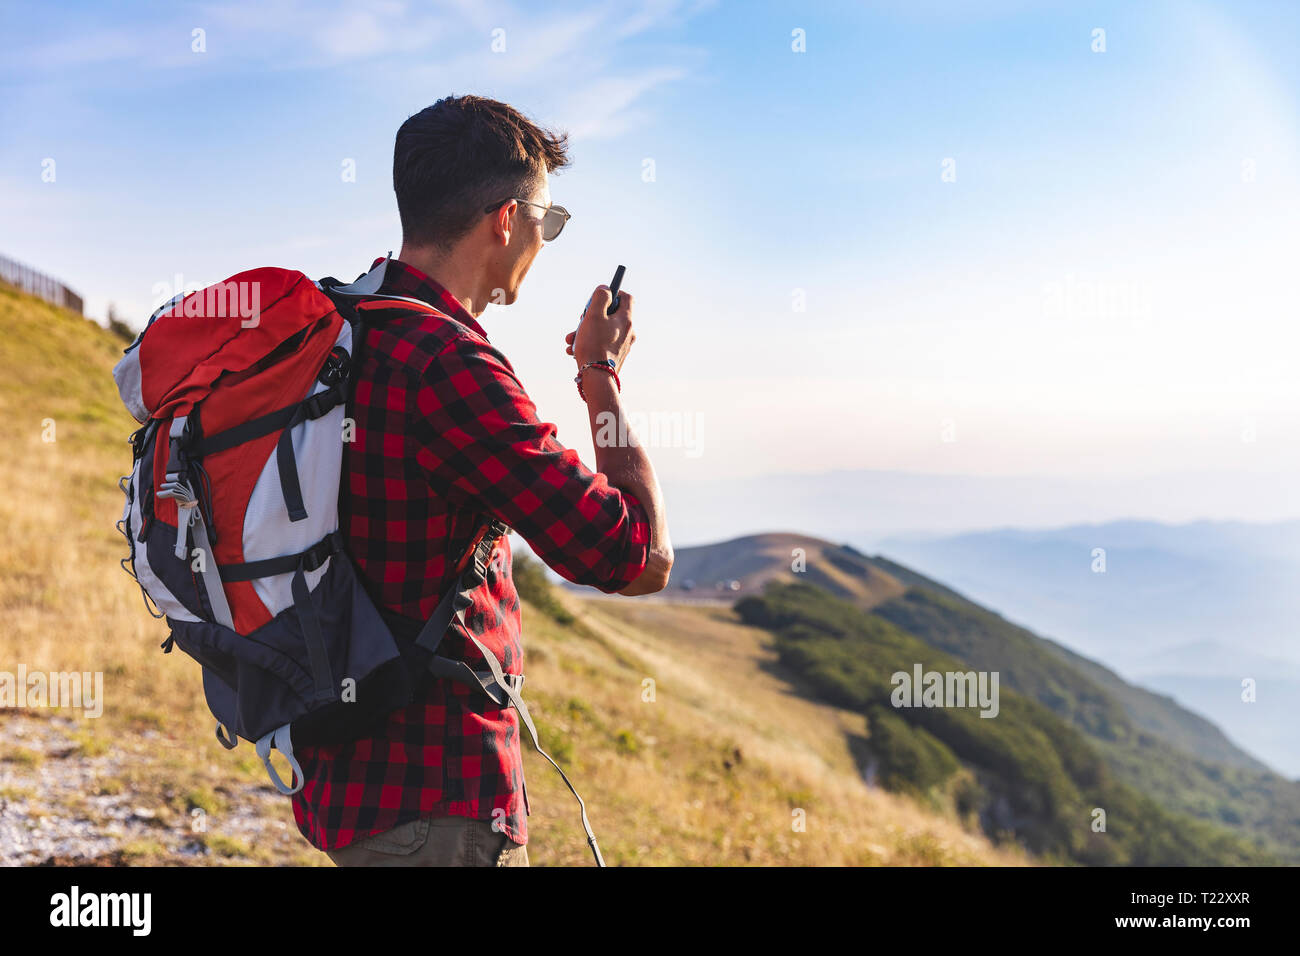 Italy, Monte Nerone, hiker on top of a mountain talking on a walkie talkie Stock Photo